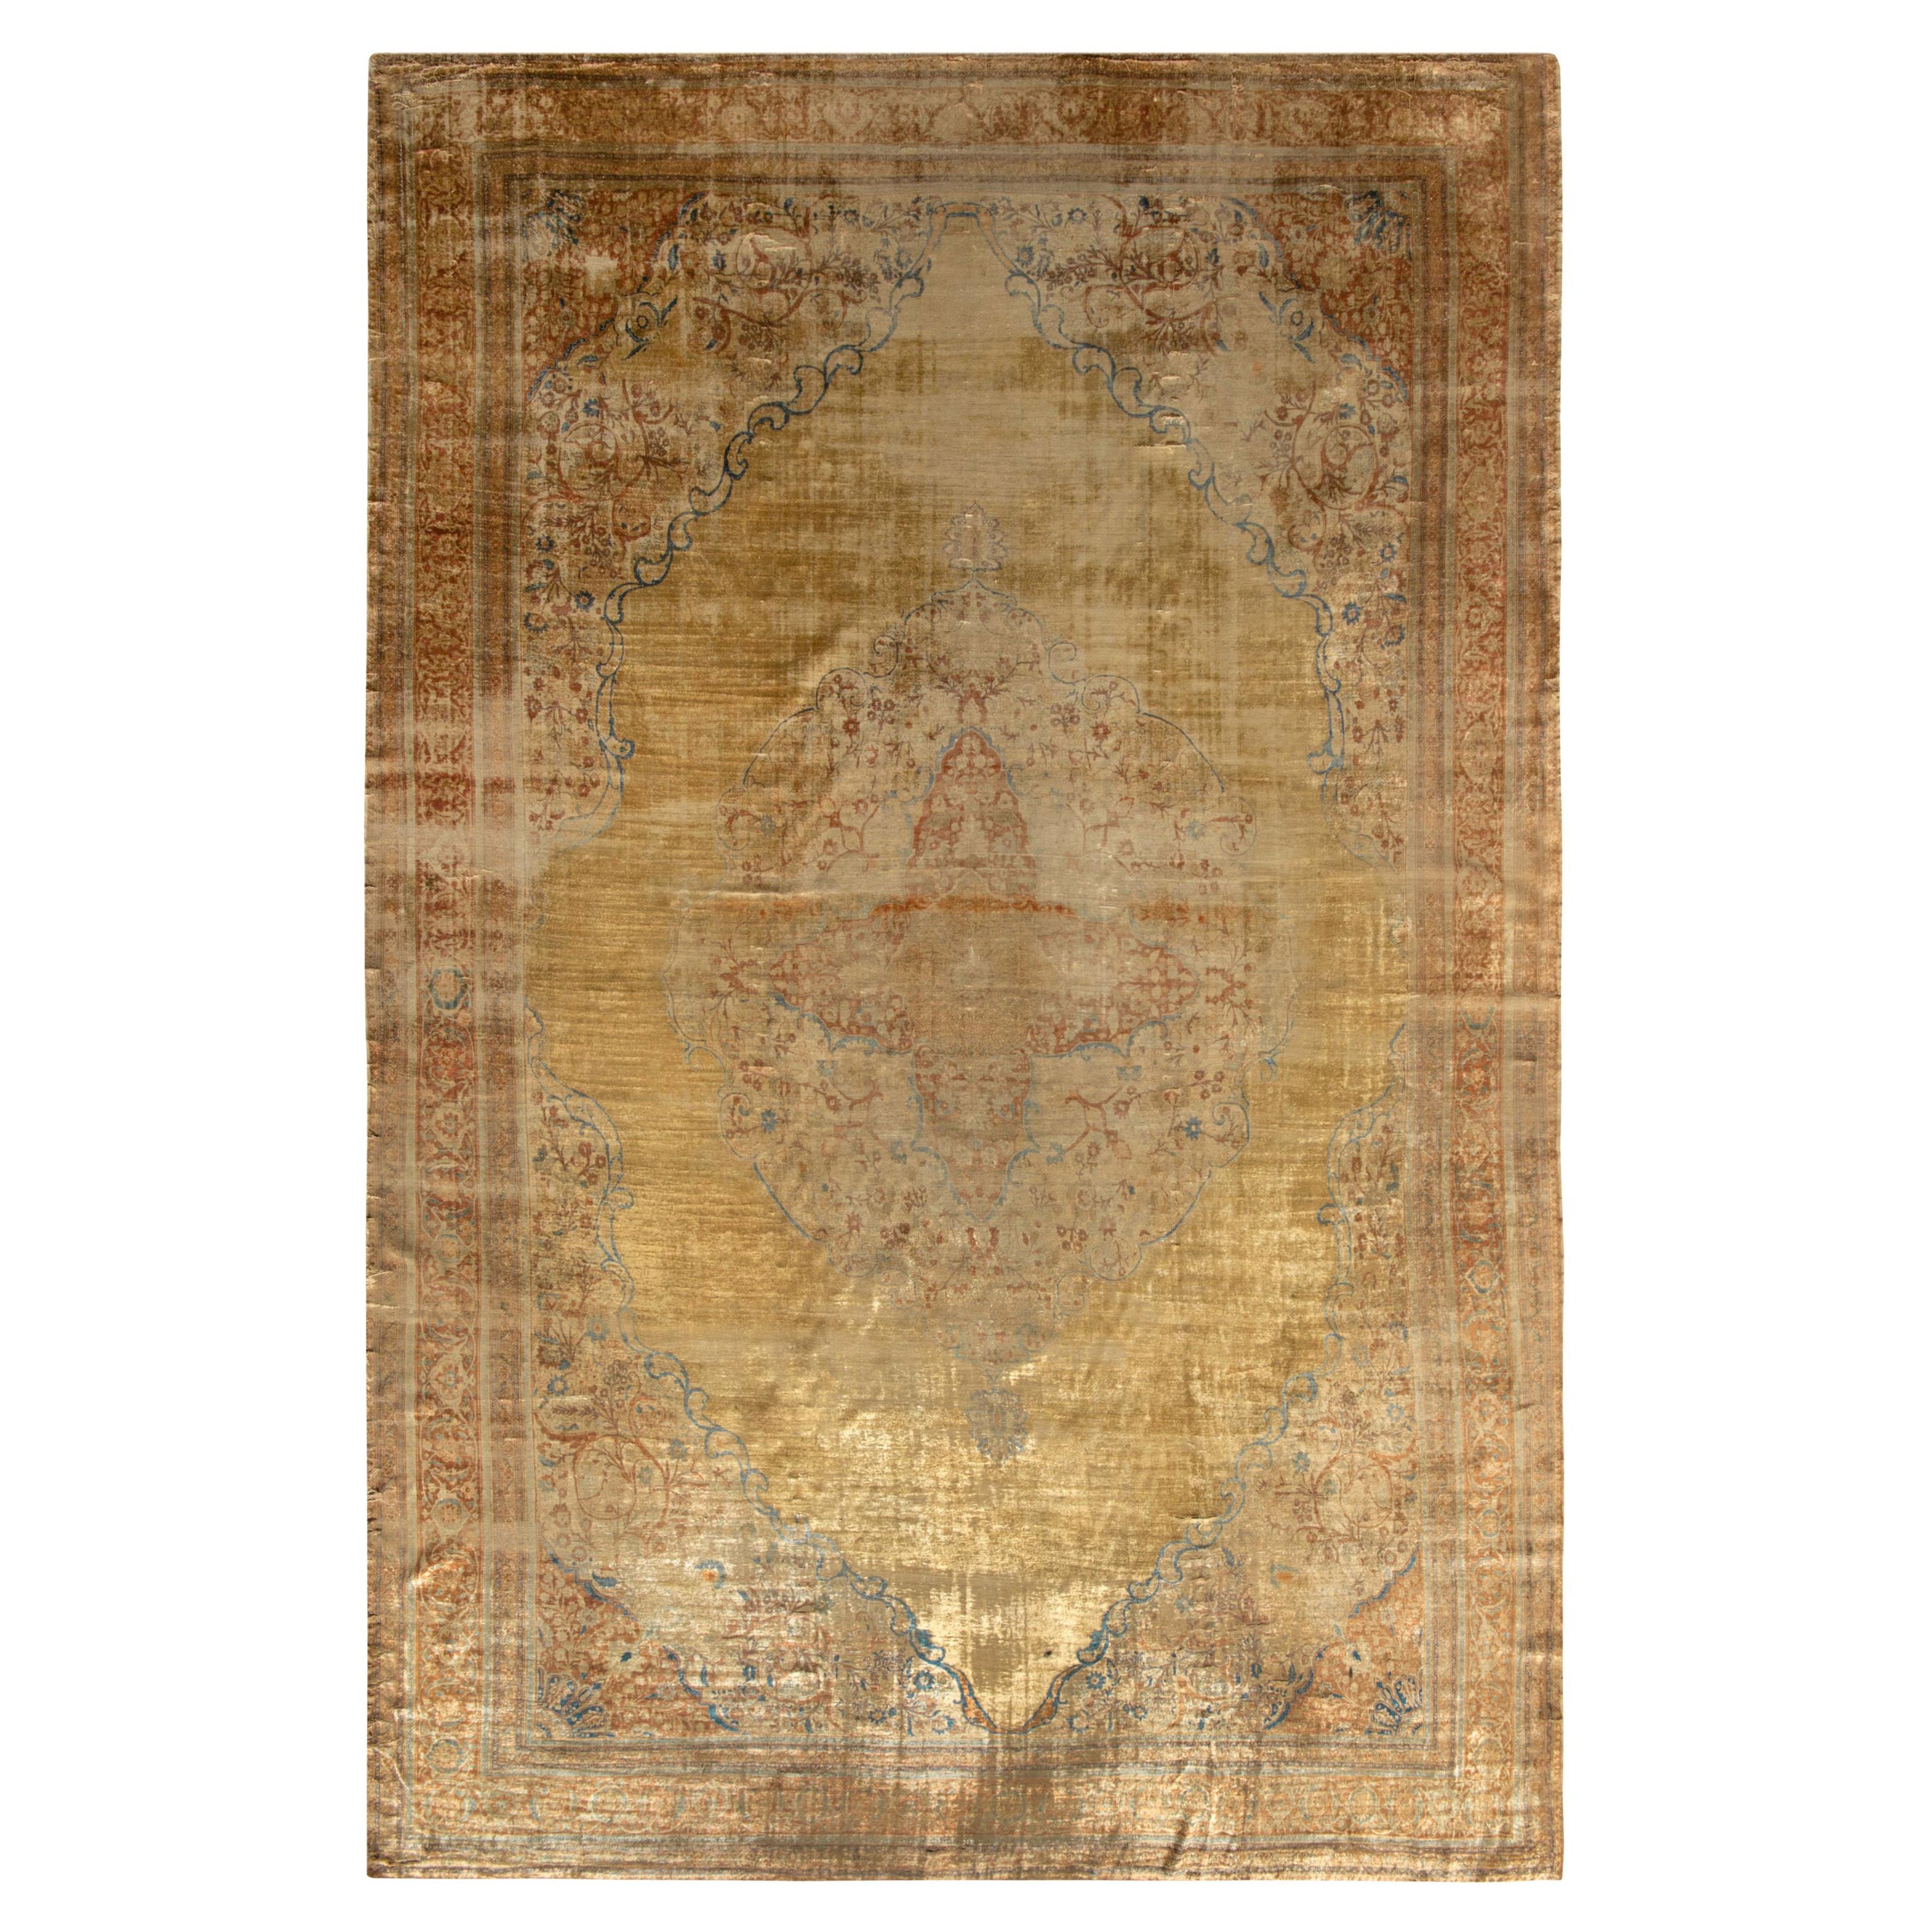 Hand-Knotted Antique Tabriz Persian Rug, Gold and Beige-Brown Medallion Pattern